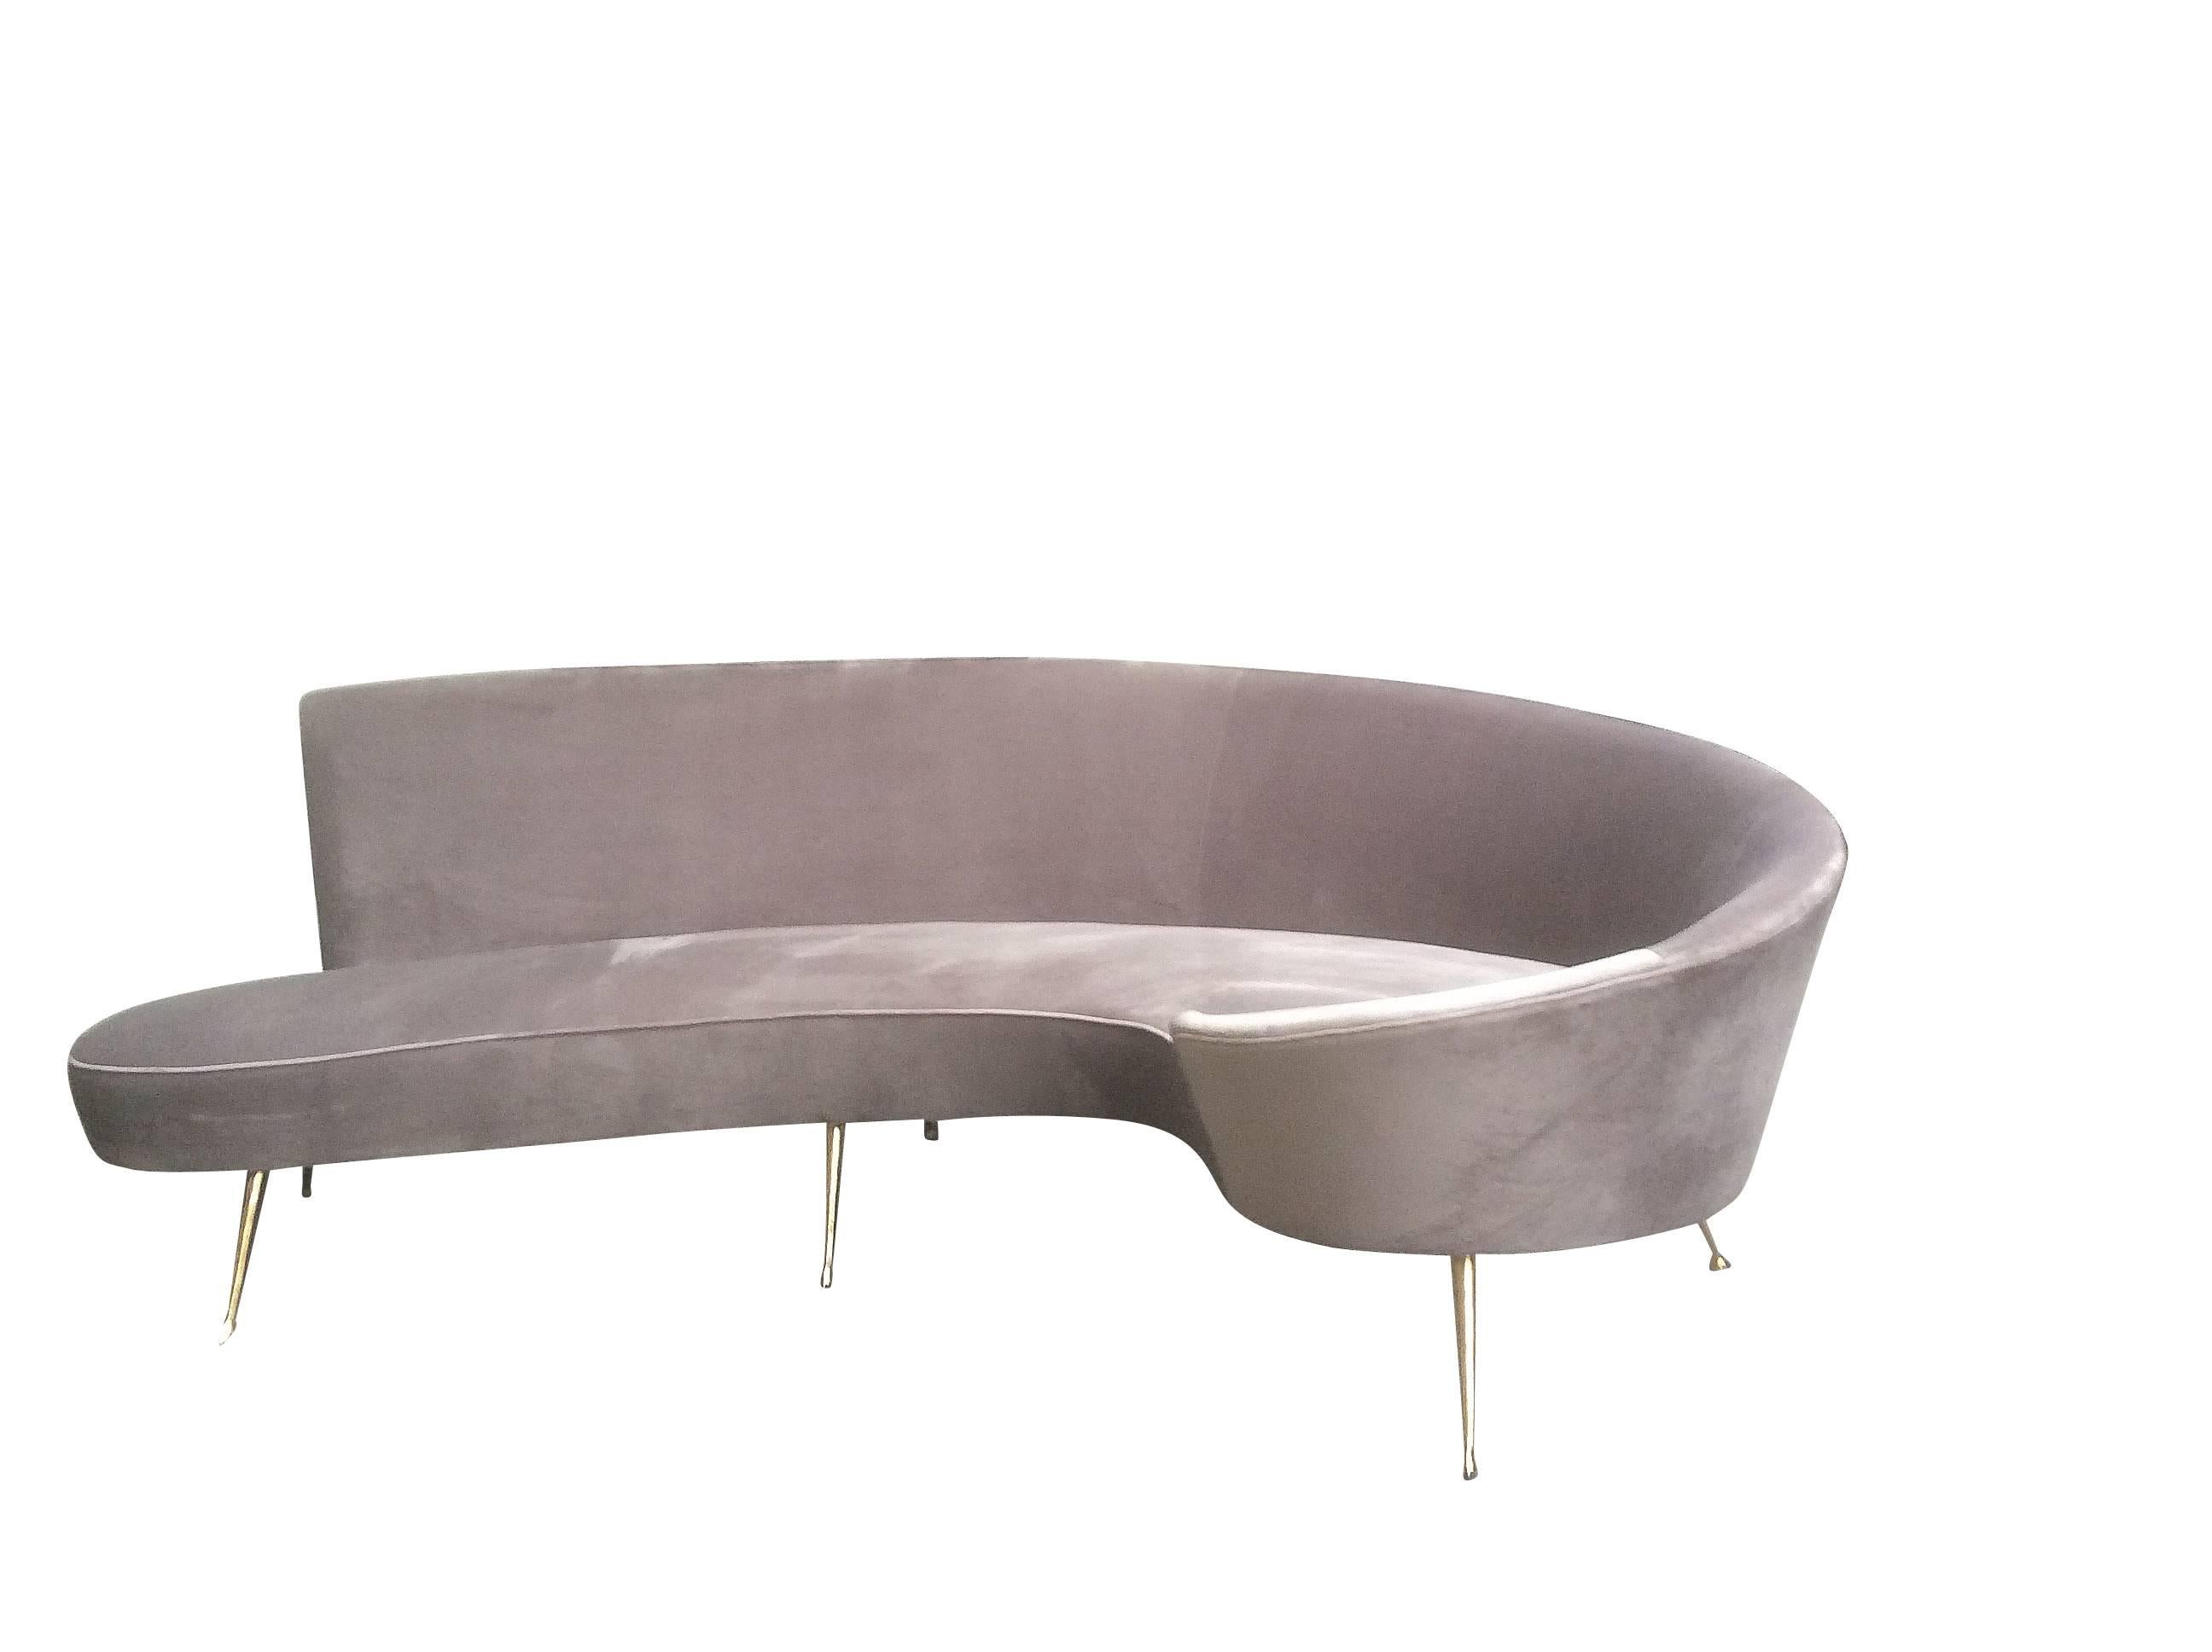 Large Italian Curved Sofa in 1950s Style 2